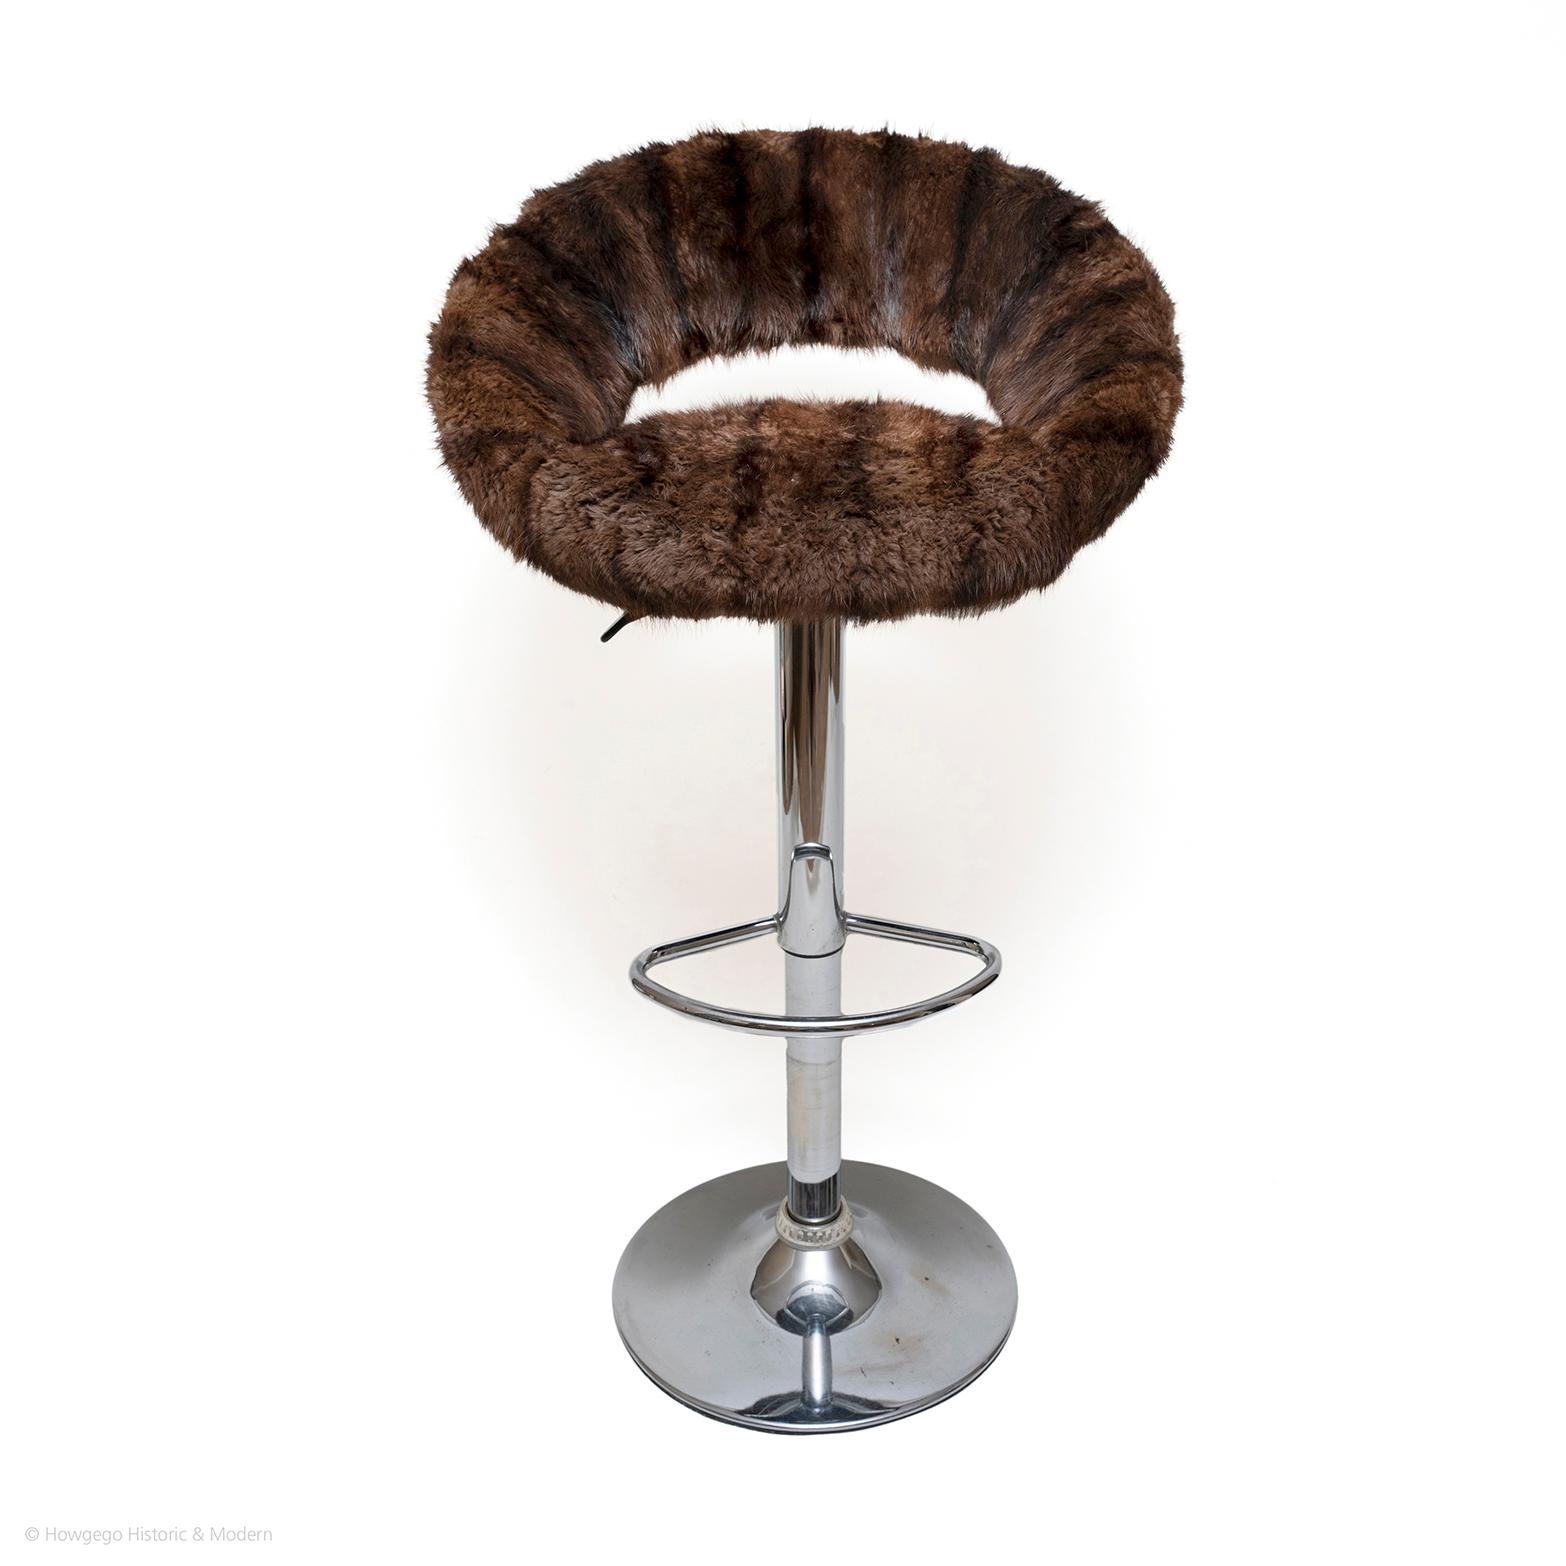 Classic form with a twist.
The mink upholstery is luxurious elevating the bar stool into a luxury item.
Practical with swivel function and adjustable.

Provenance private collection.
Maker unknown.

Measures: diameter 56 cm., 22